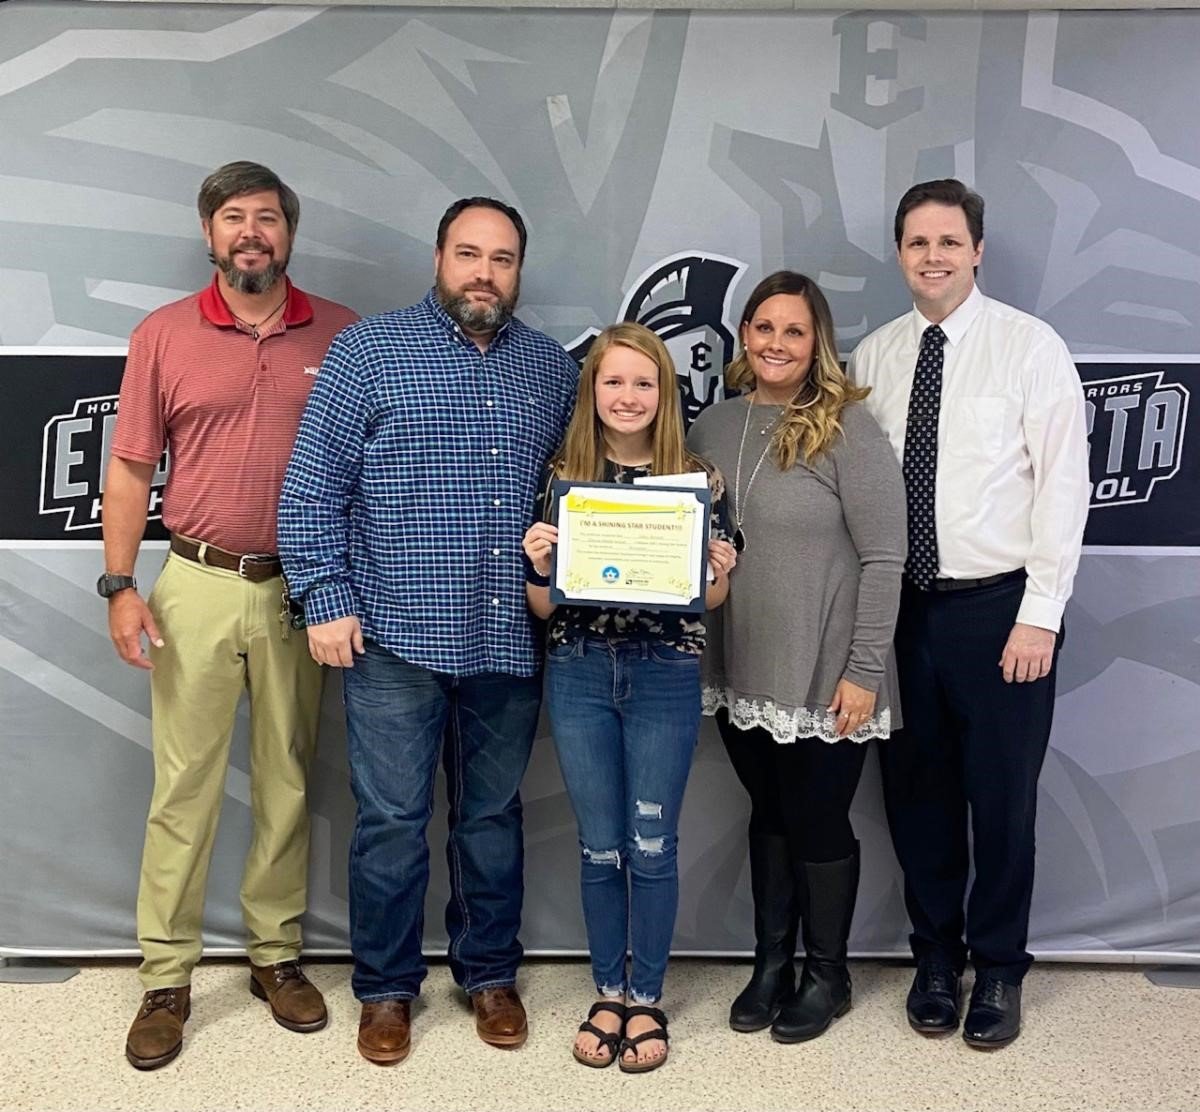 Elberta Middle School student Haley Burnett (holding certificate) is pictured with (l-r) Assistant Principal Thomas Duffy, parents Michael and Ashley Burnett, and WALA FOX 10 TV’s meteorologist Michael White.